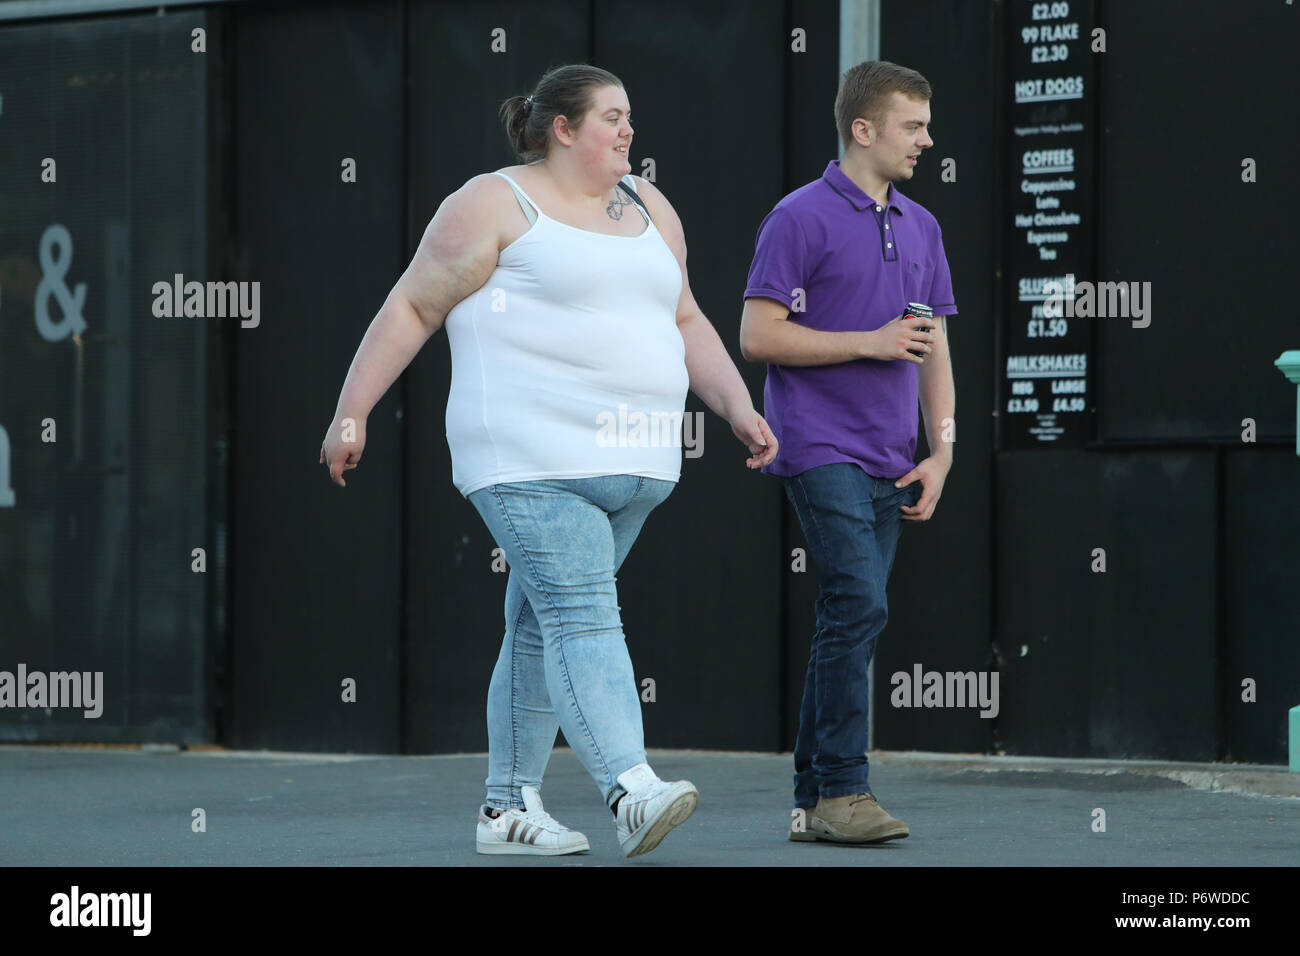 An overweight woman walking with a thin man Stock Photo